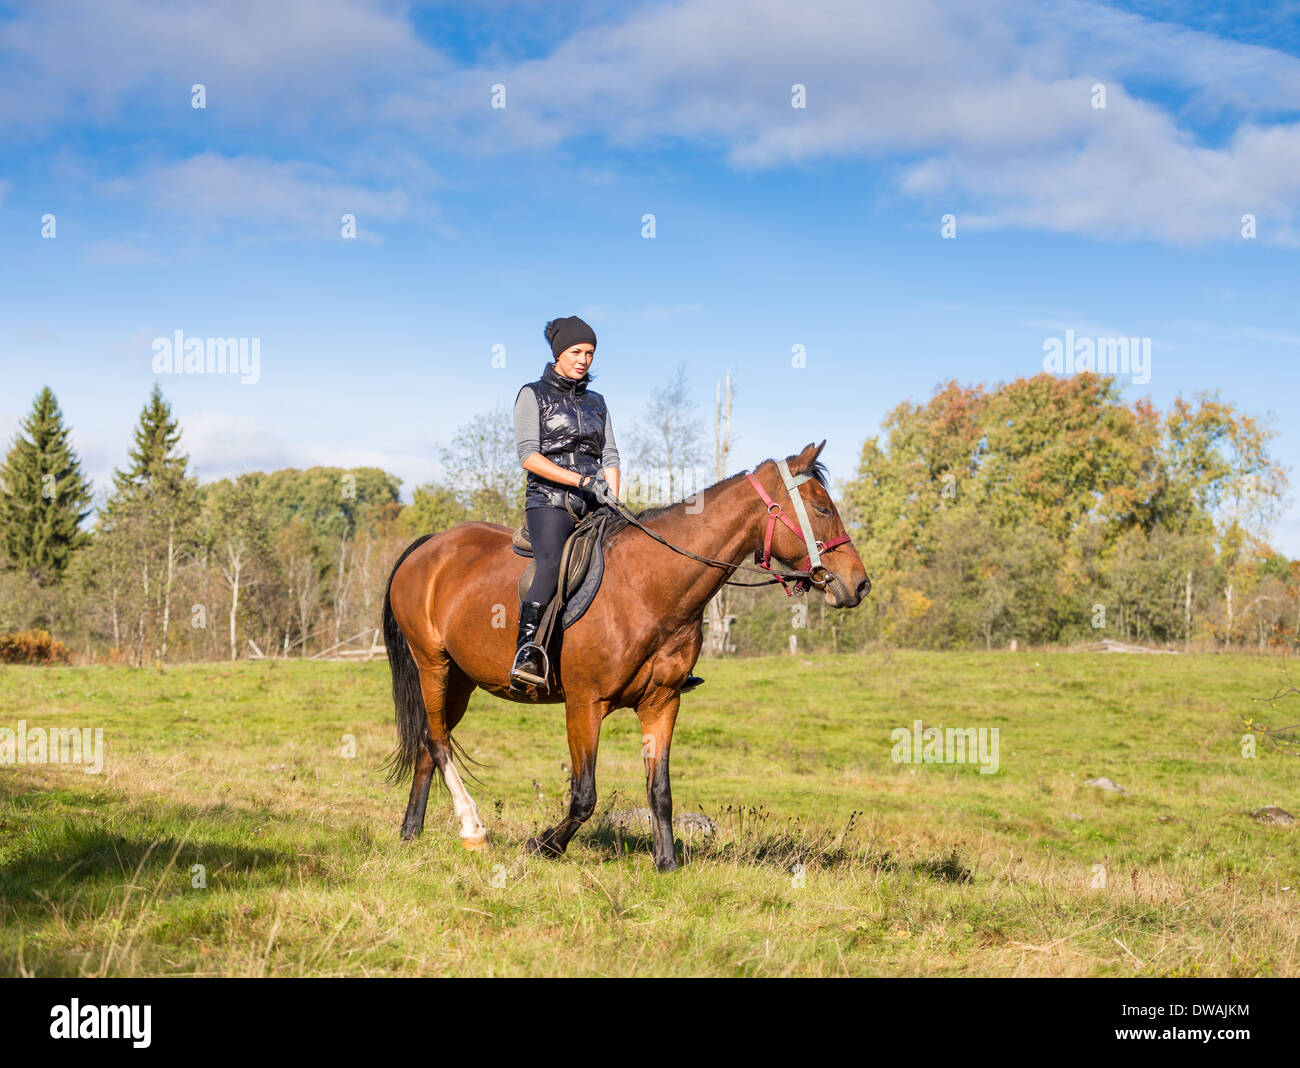 Elegant attractive woman riding a horse Stock Photo